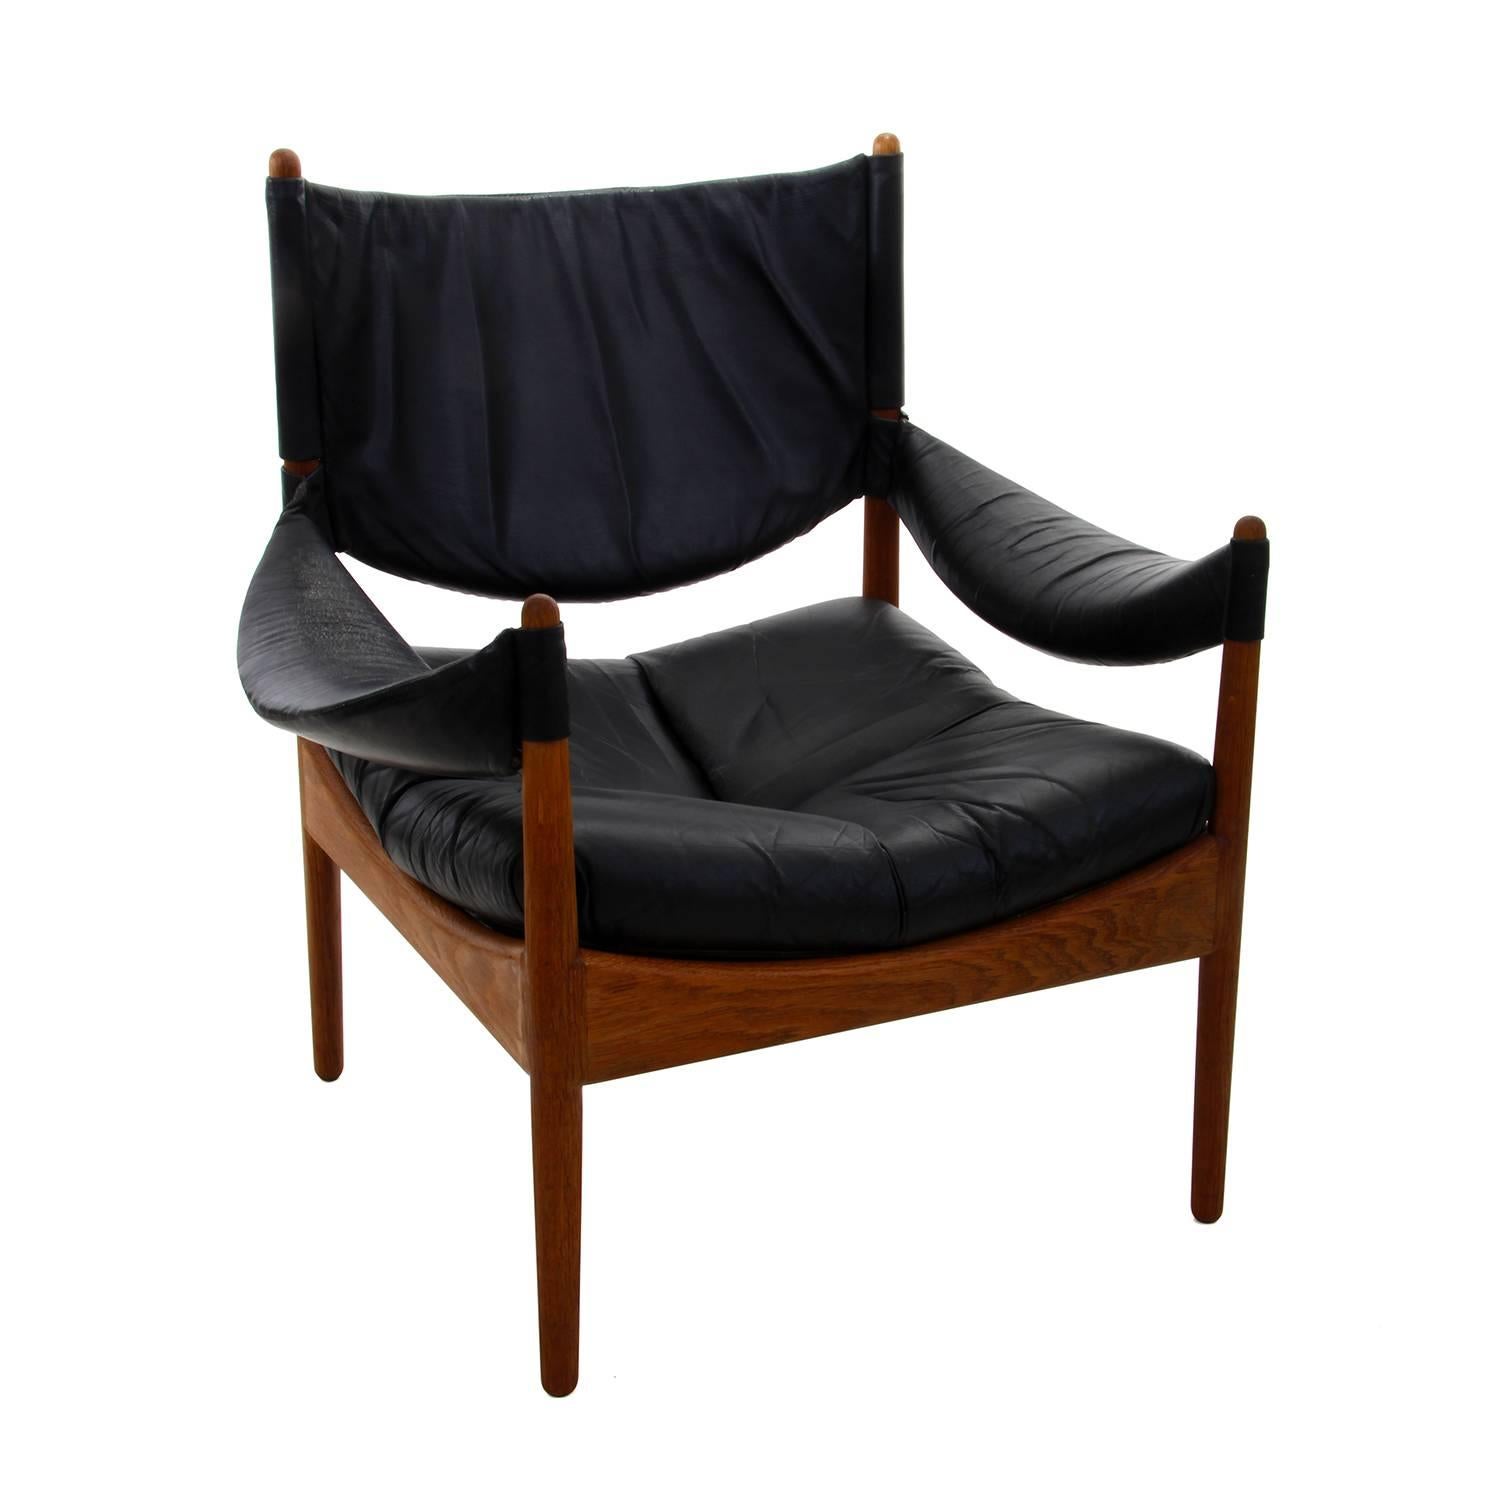 Modus Easy Chair by Kristian Vedel for Søren Willadsen in 1963 - Danish Mid-Century Modern oil-treated oak easy chair with the original black leather upholstery, in good vintage condition.

A gorgeous low easy chair that oozes craftsmanship,